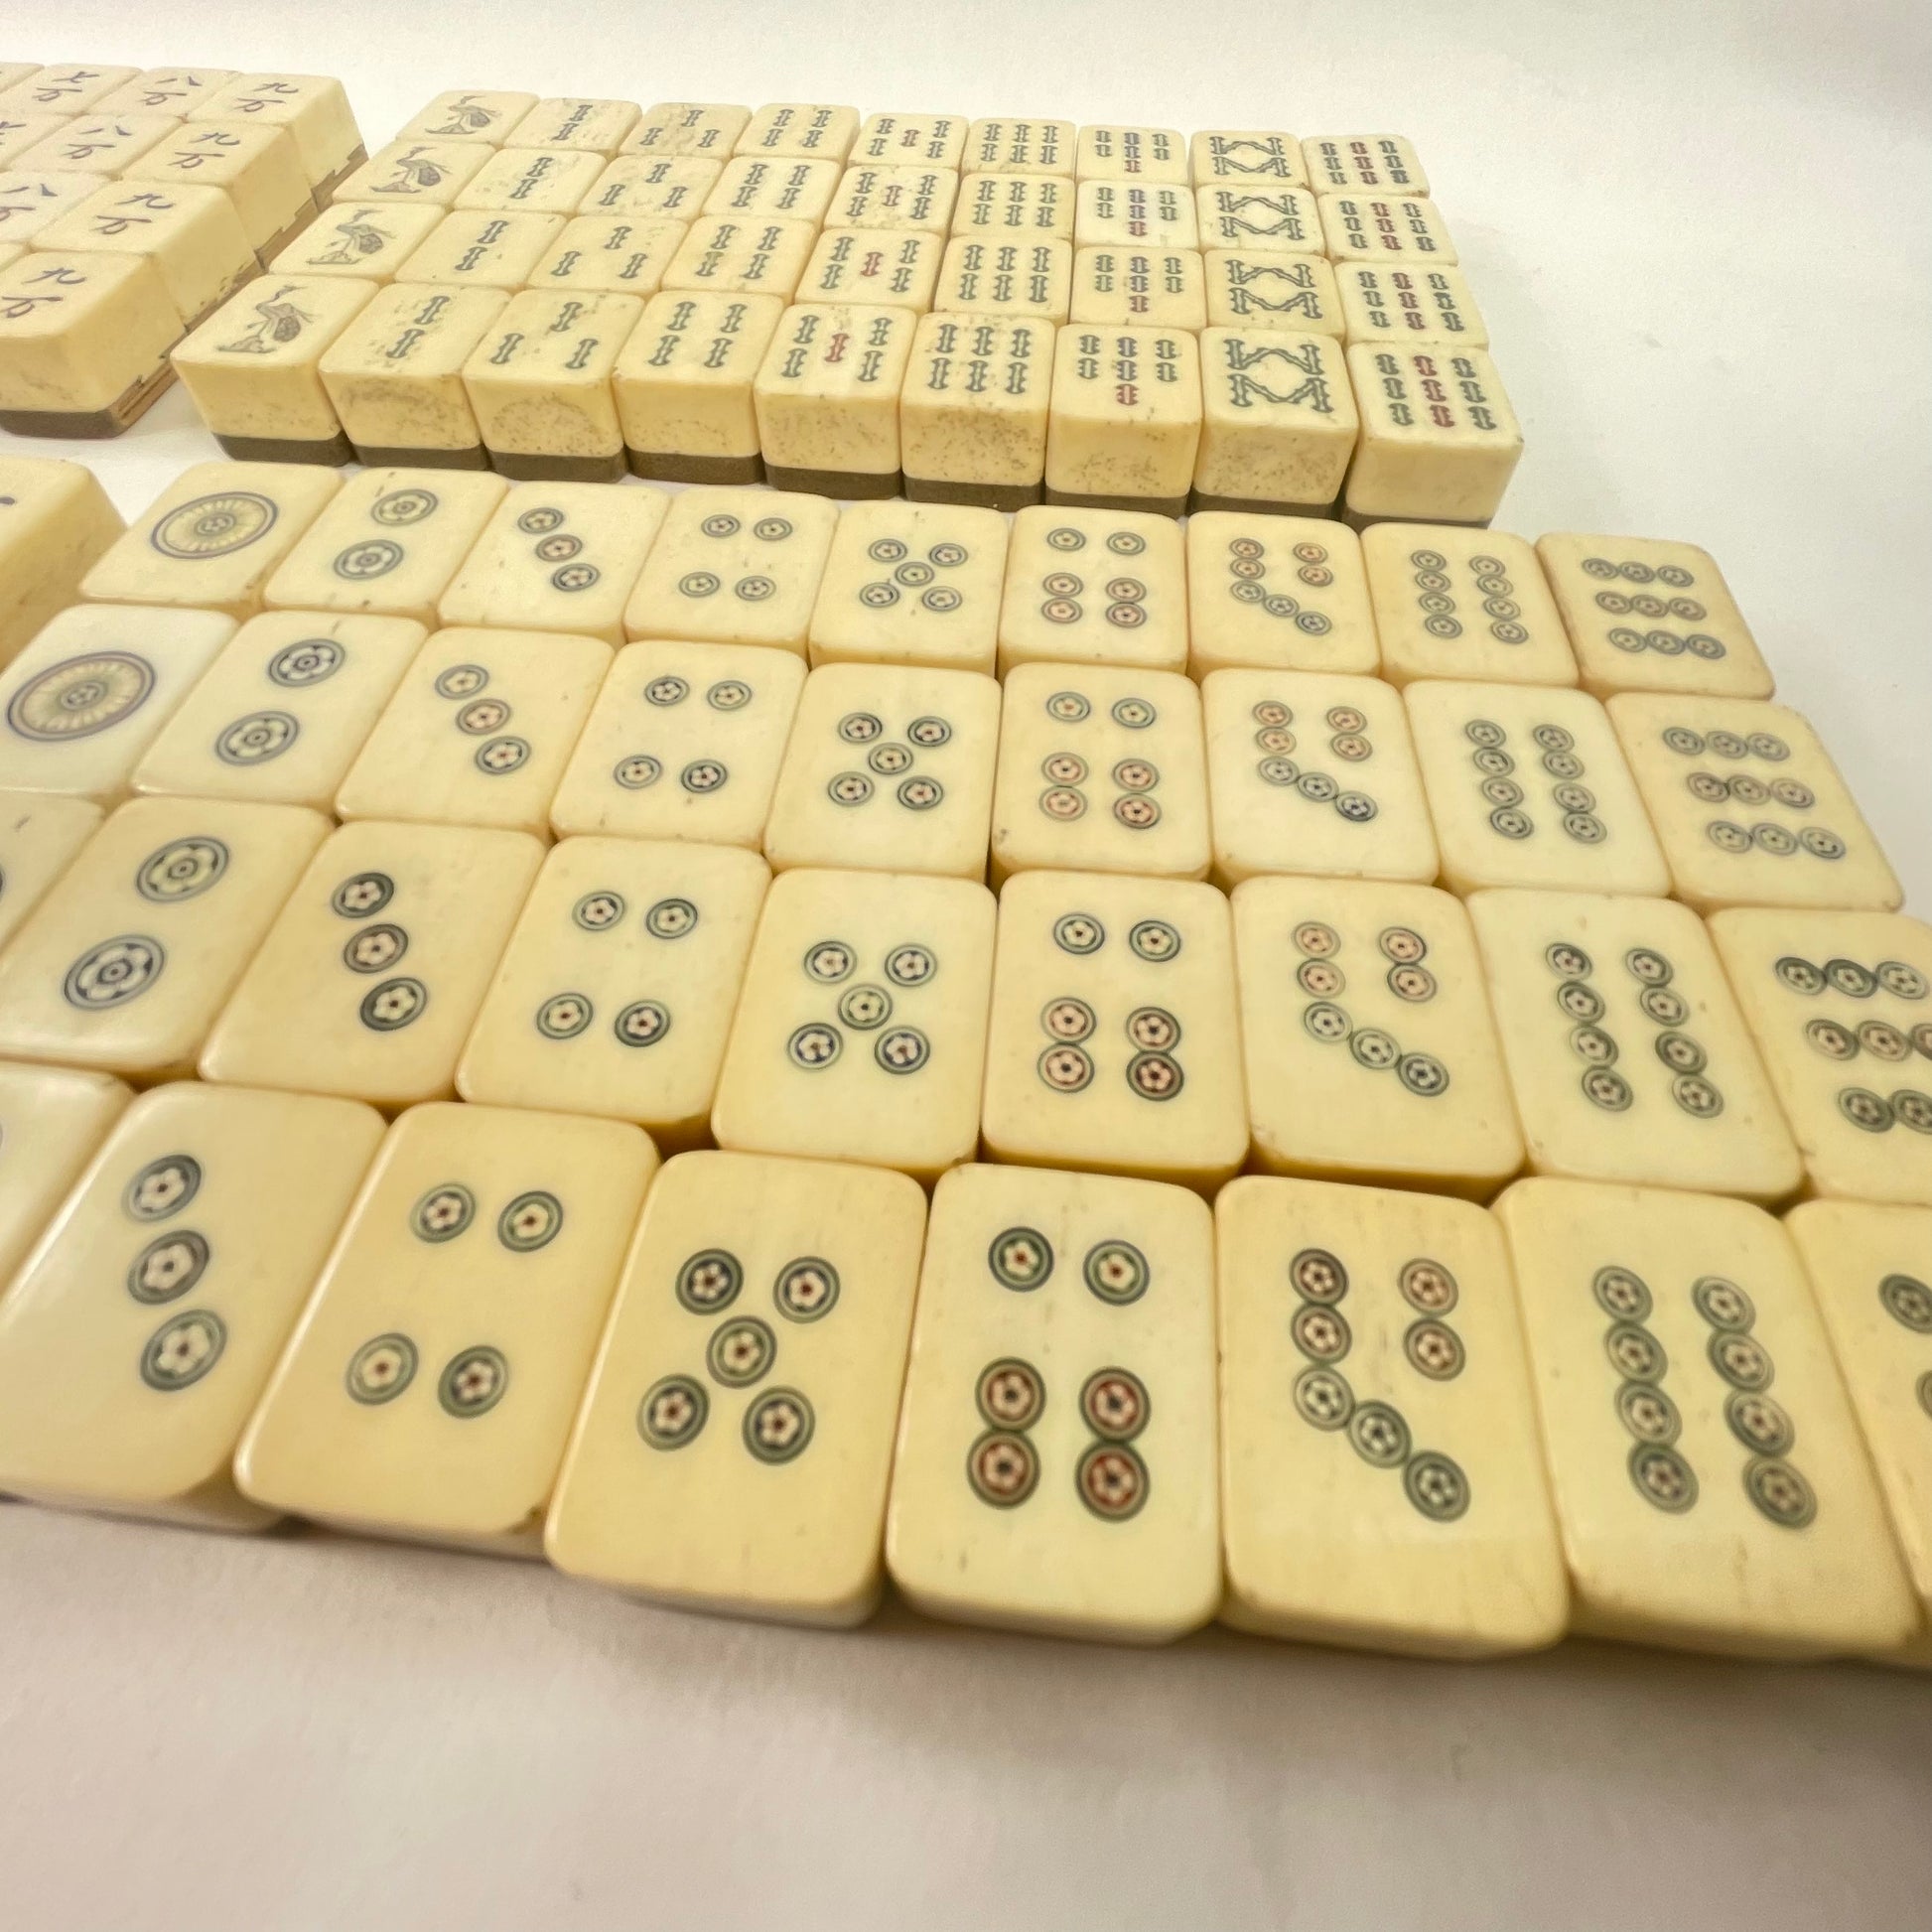 ANTIQUE MAHJONG SET IVORY WOOD CHINESE GAME W/ CASE NR